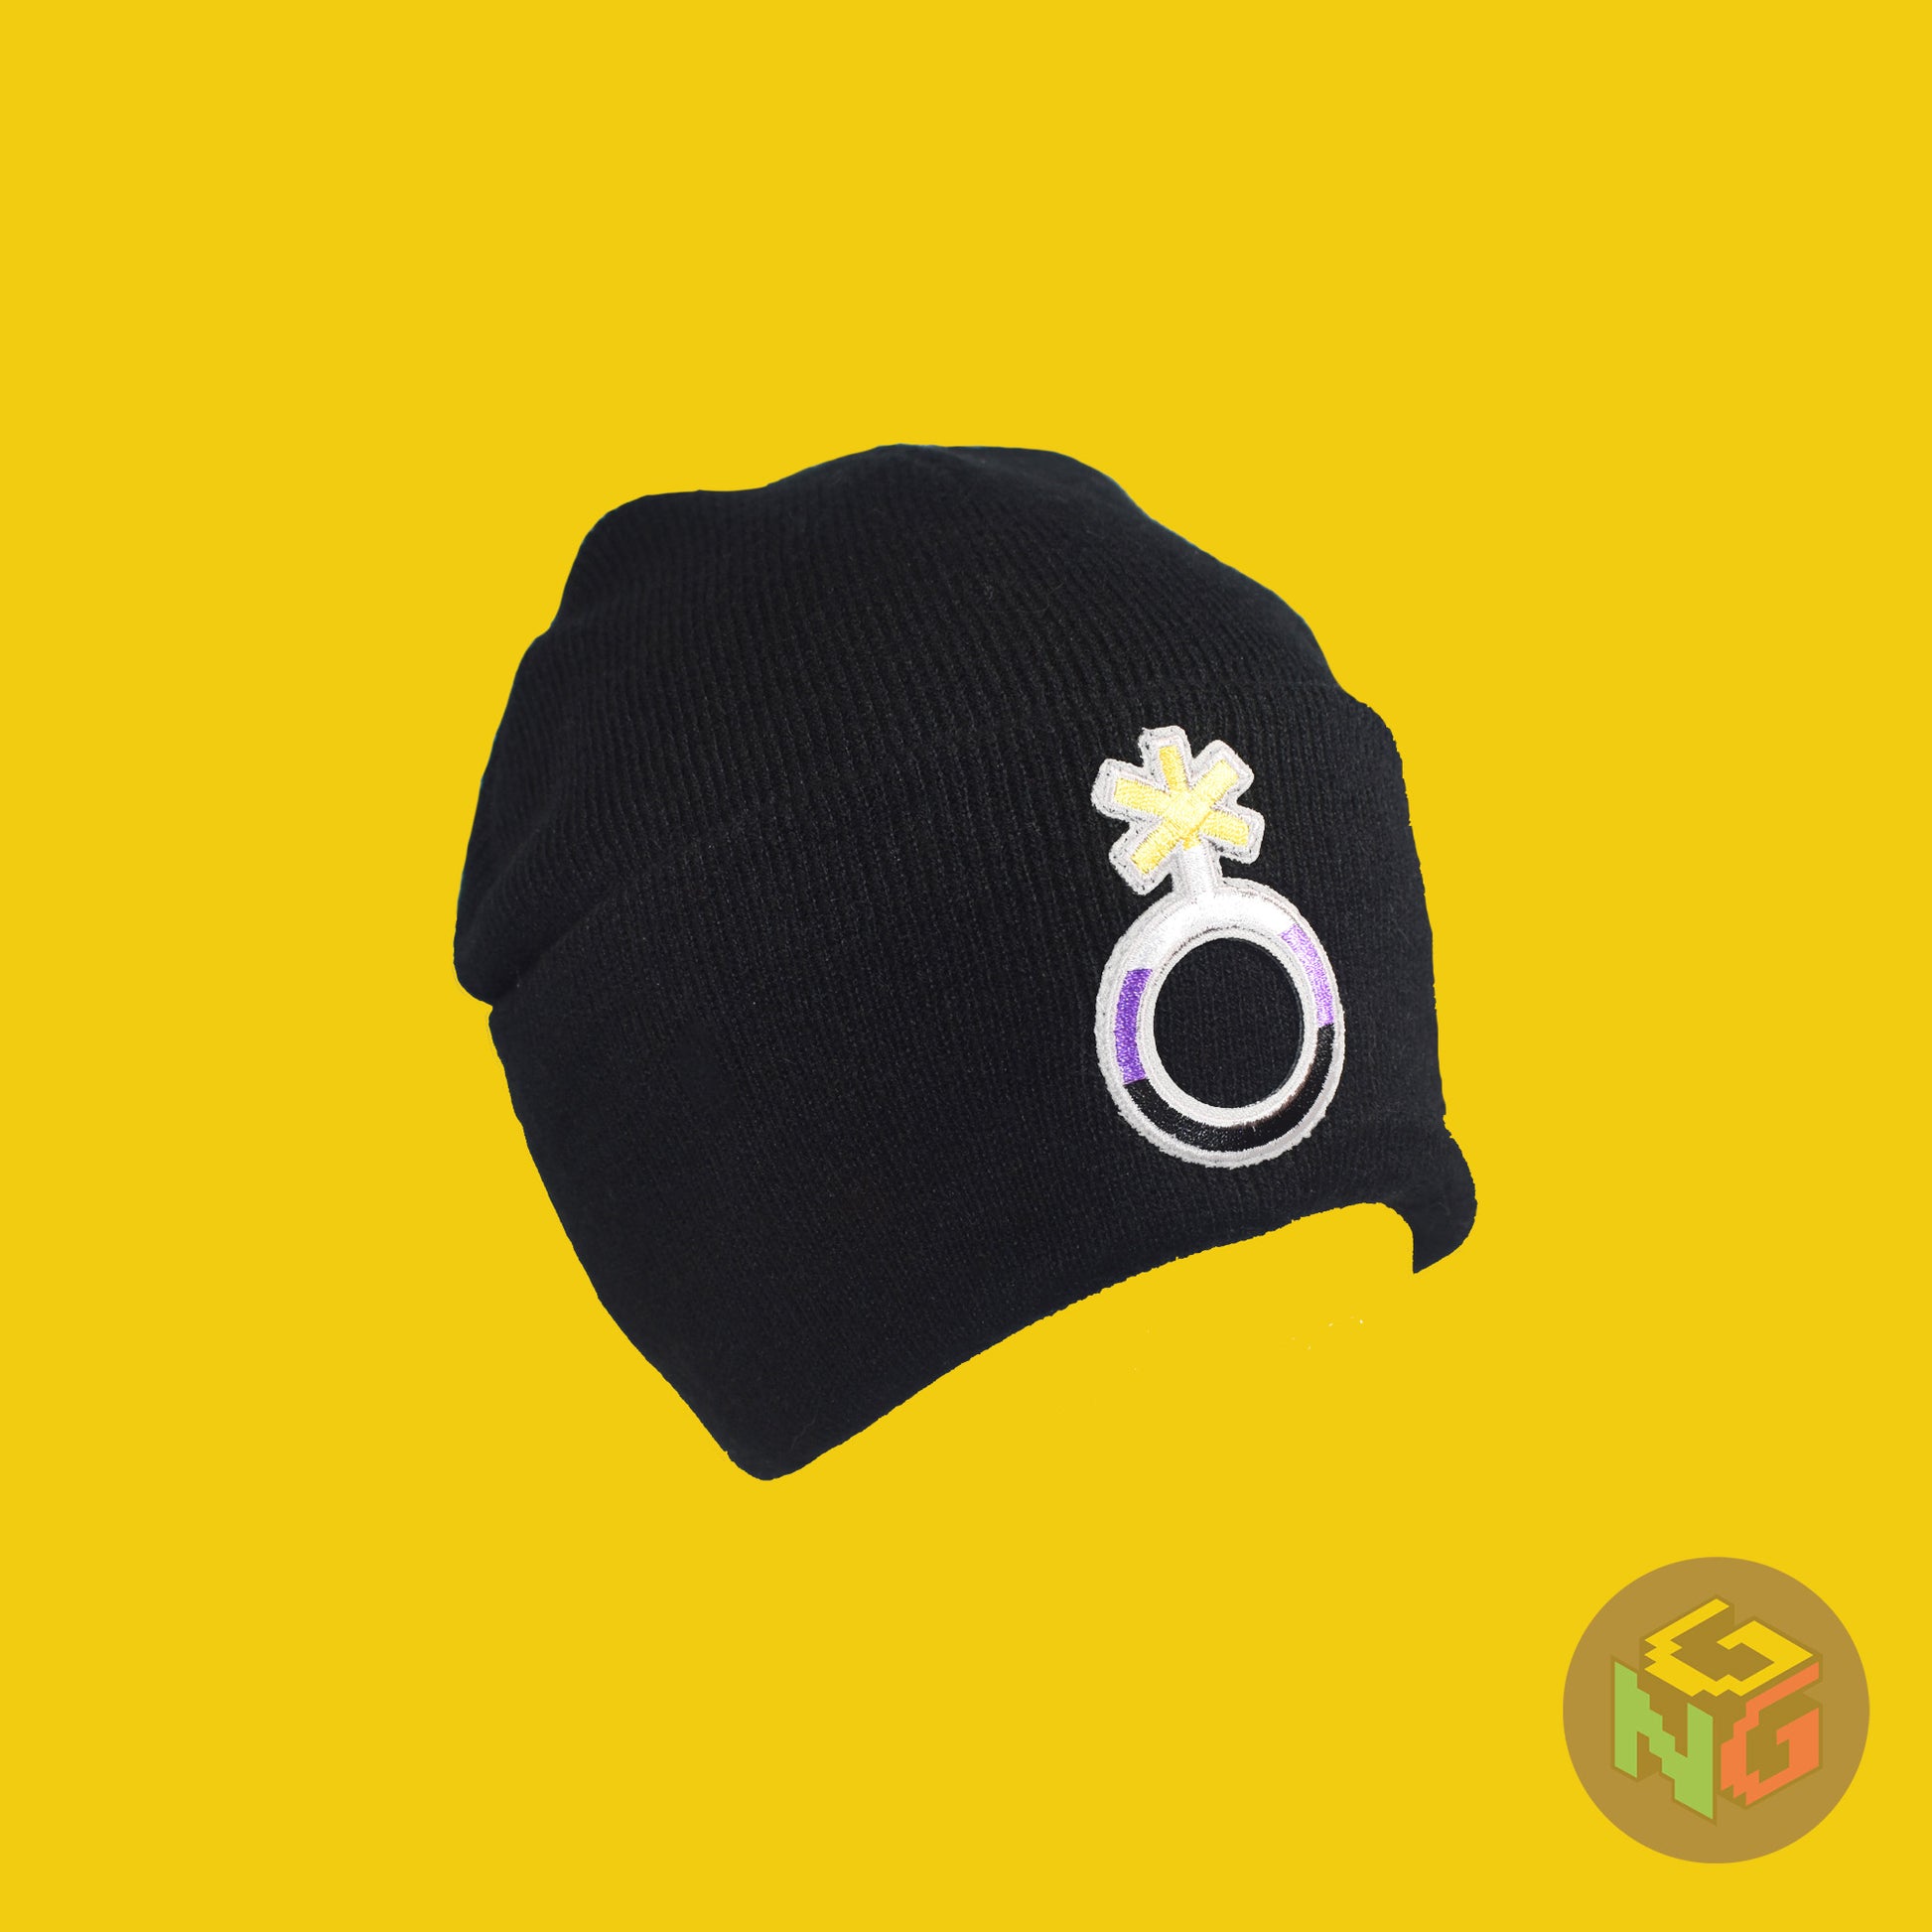 Black knit fabric beanie with the nonbinary symbol in yellow, white, purple, and black on the front. It is stretched and viewed in 3/4 on a yellow background